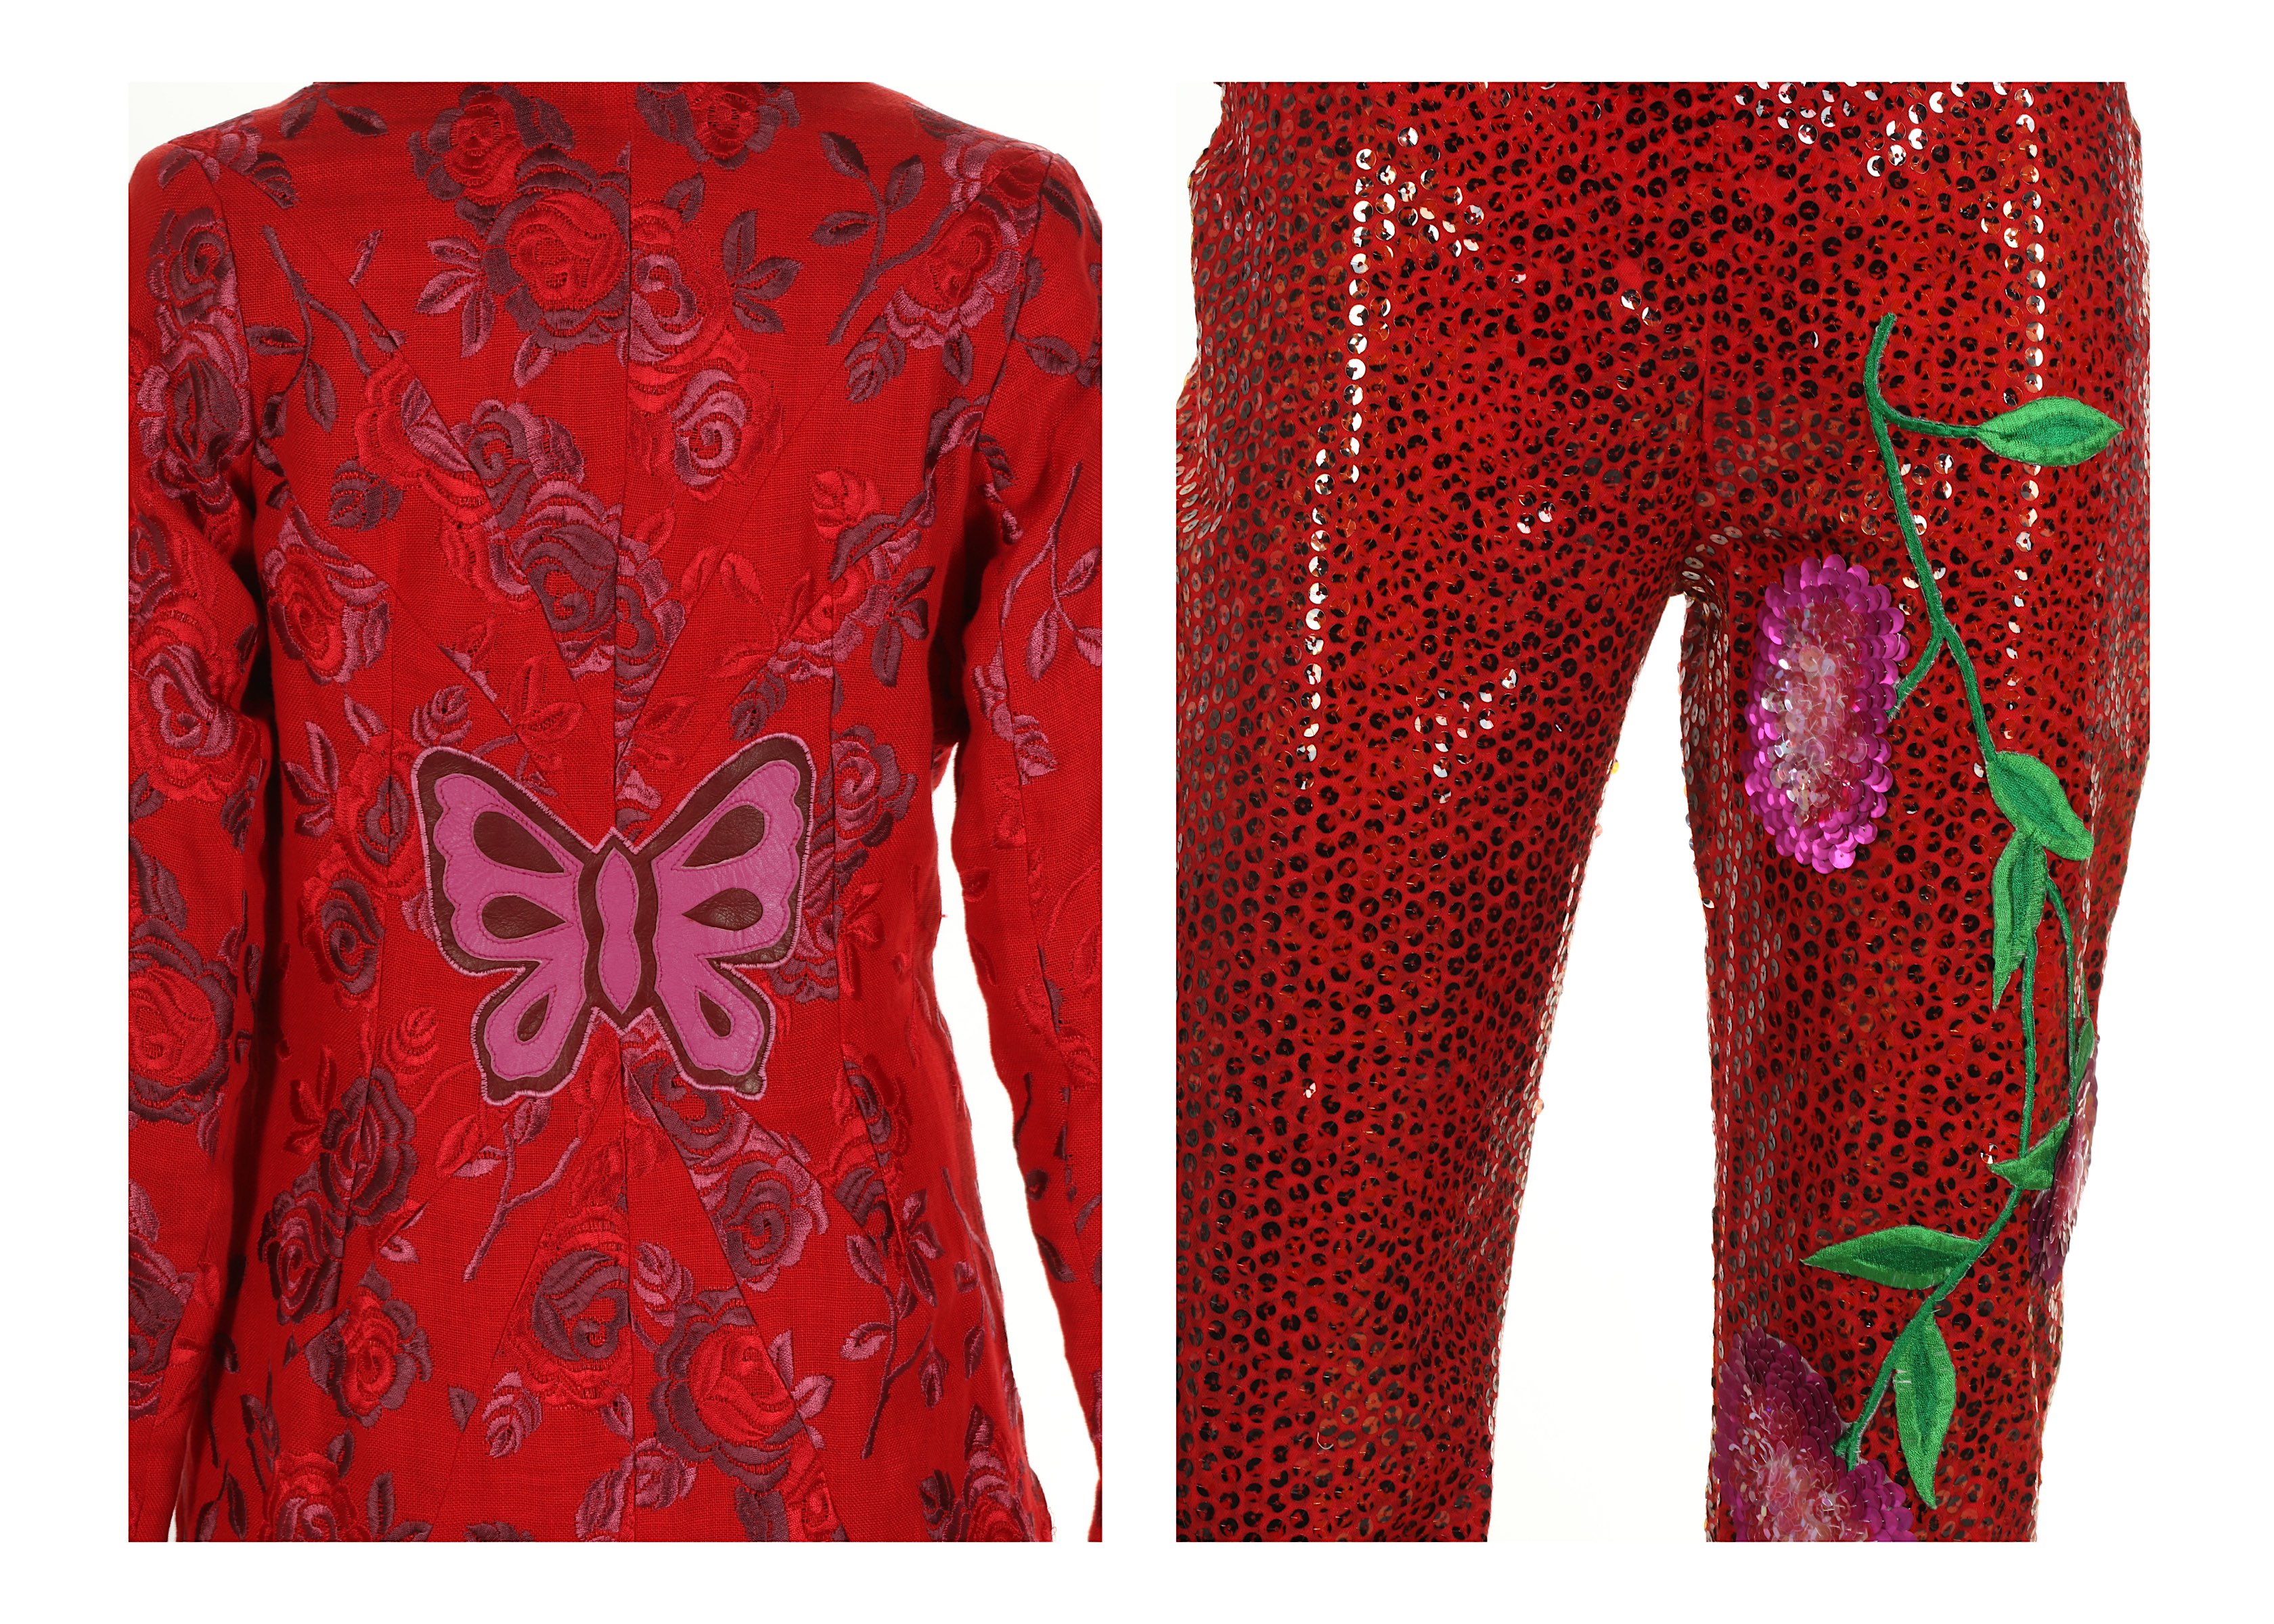 Voyage Blue and Red Ensembles, late 1990s, to include a red dress coat with leather butterfly to - Image 5 of 7